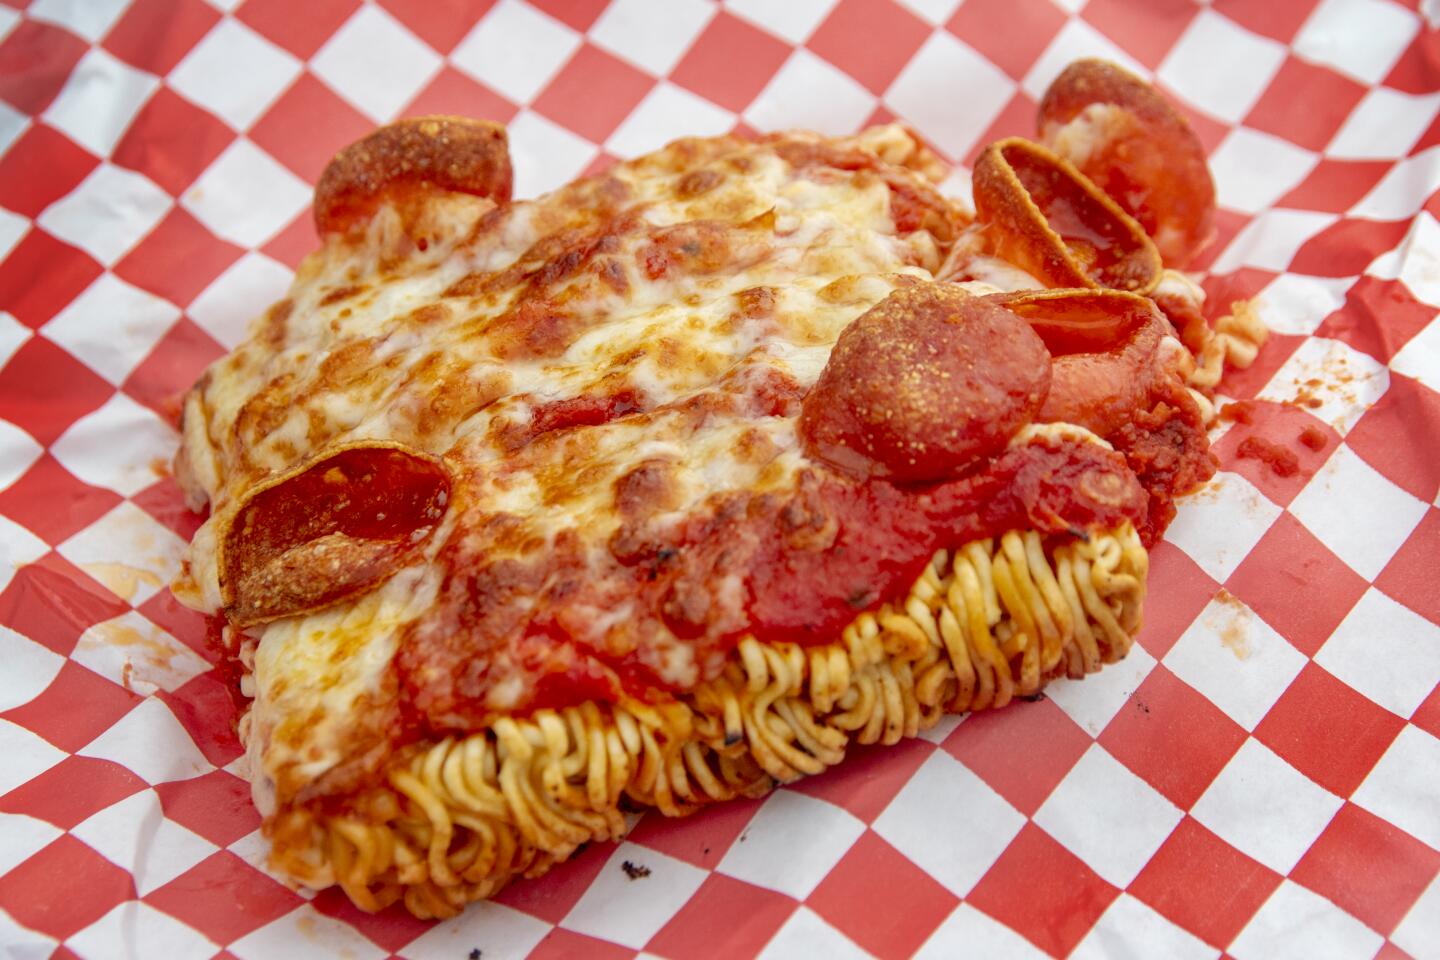 Sgt. Pepperoni's served ramen pizza at Sunday's Nood Beach noodle festival in Huntington Beach.